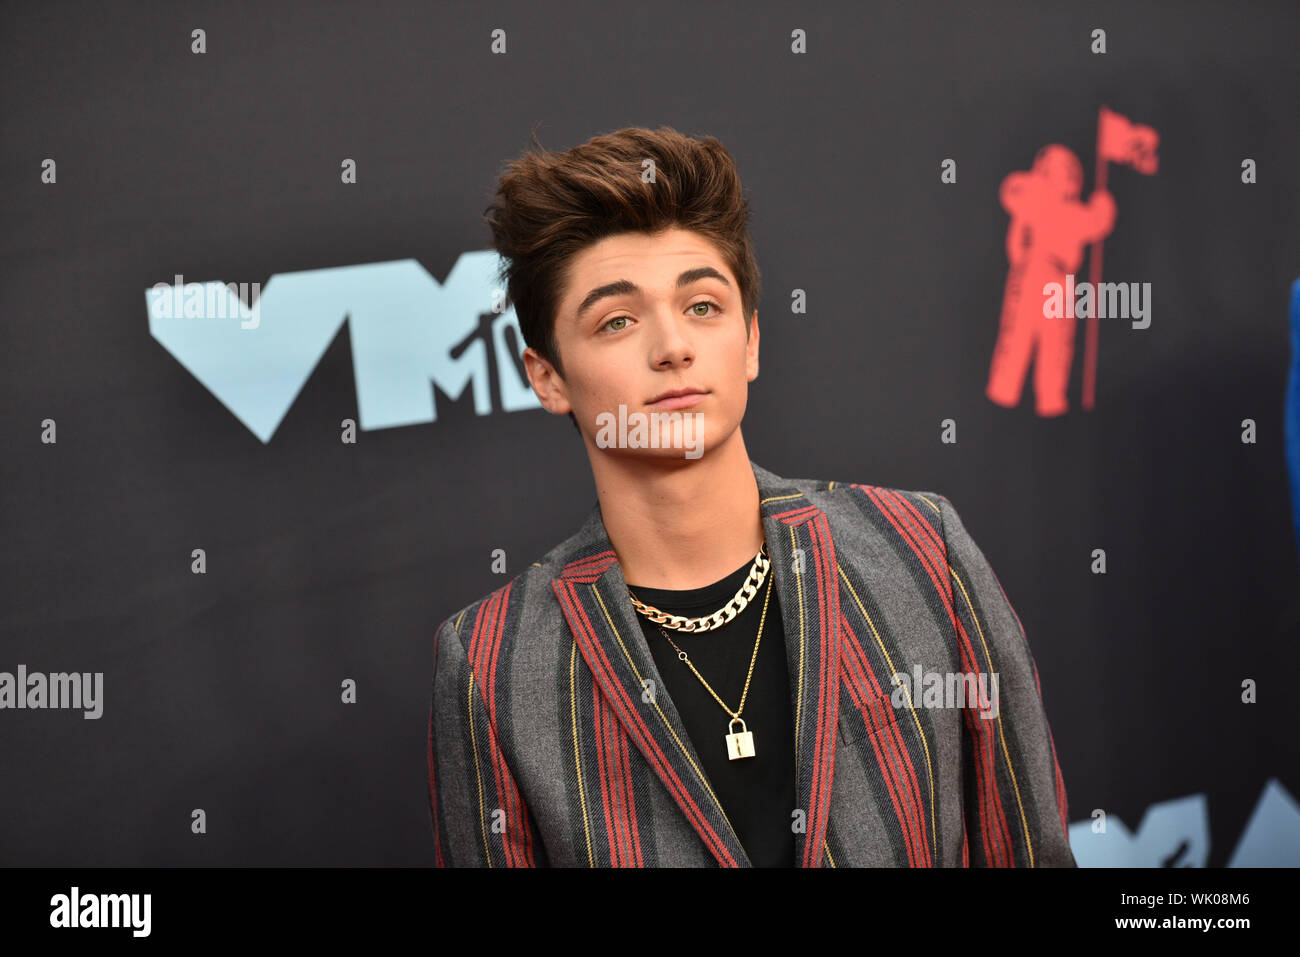 Asher Angel attends the 2019 MTV Video Music Awards at Prudential Center on August 26, 2019 in Newark, New Jersey. Stock Photo